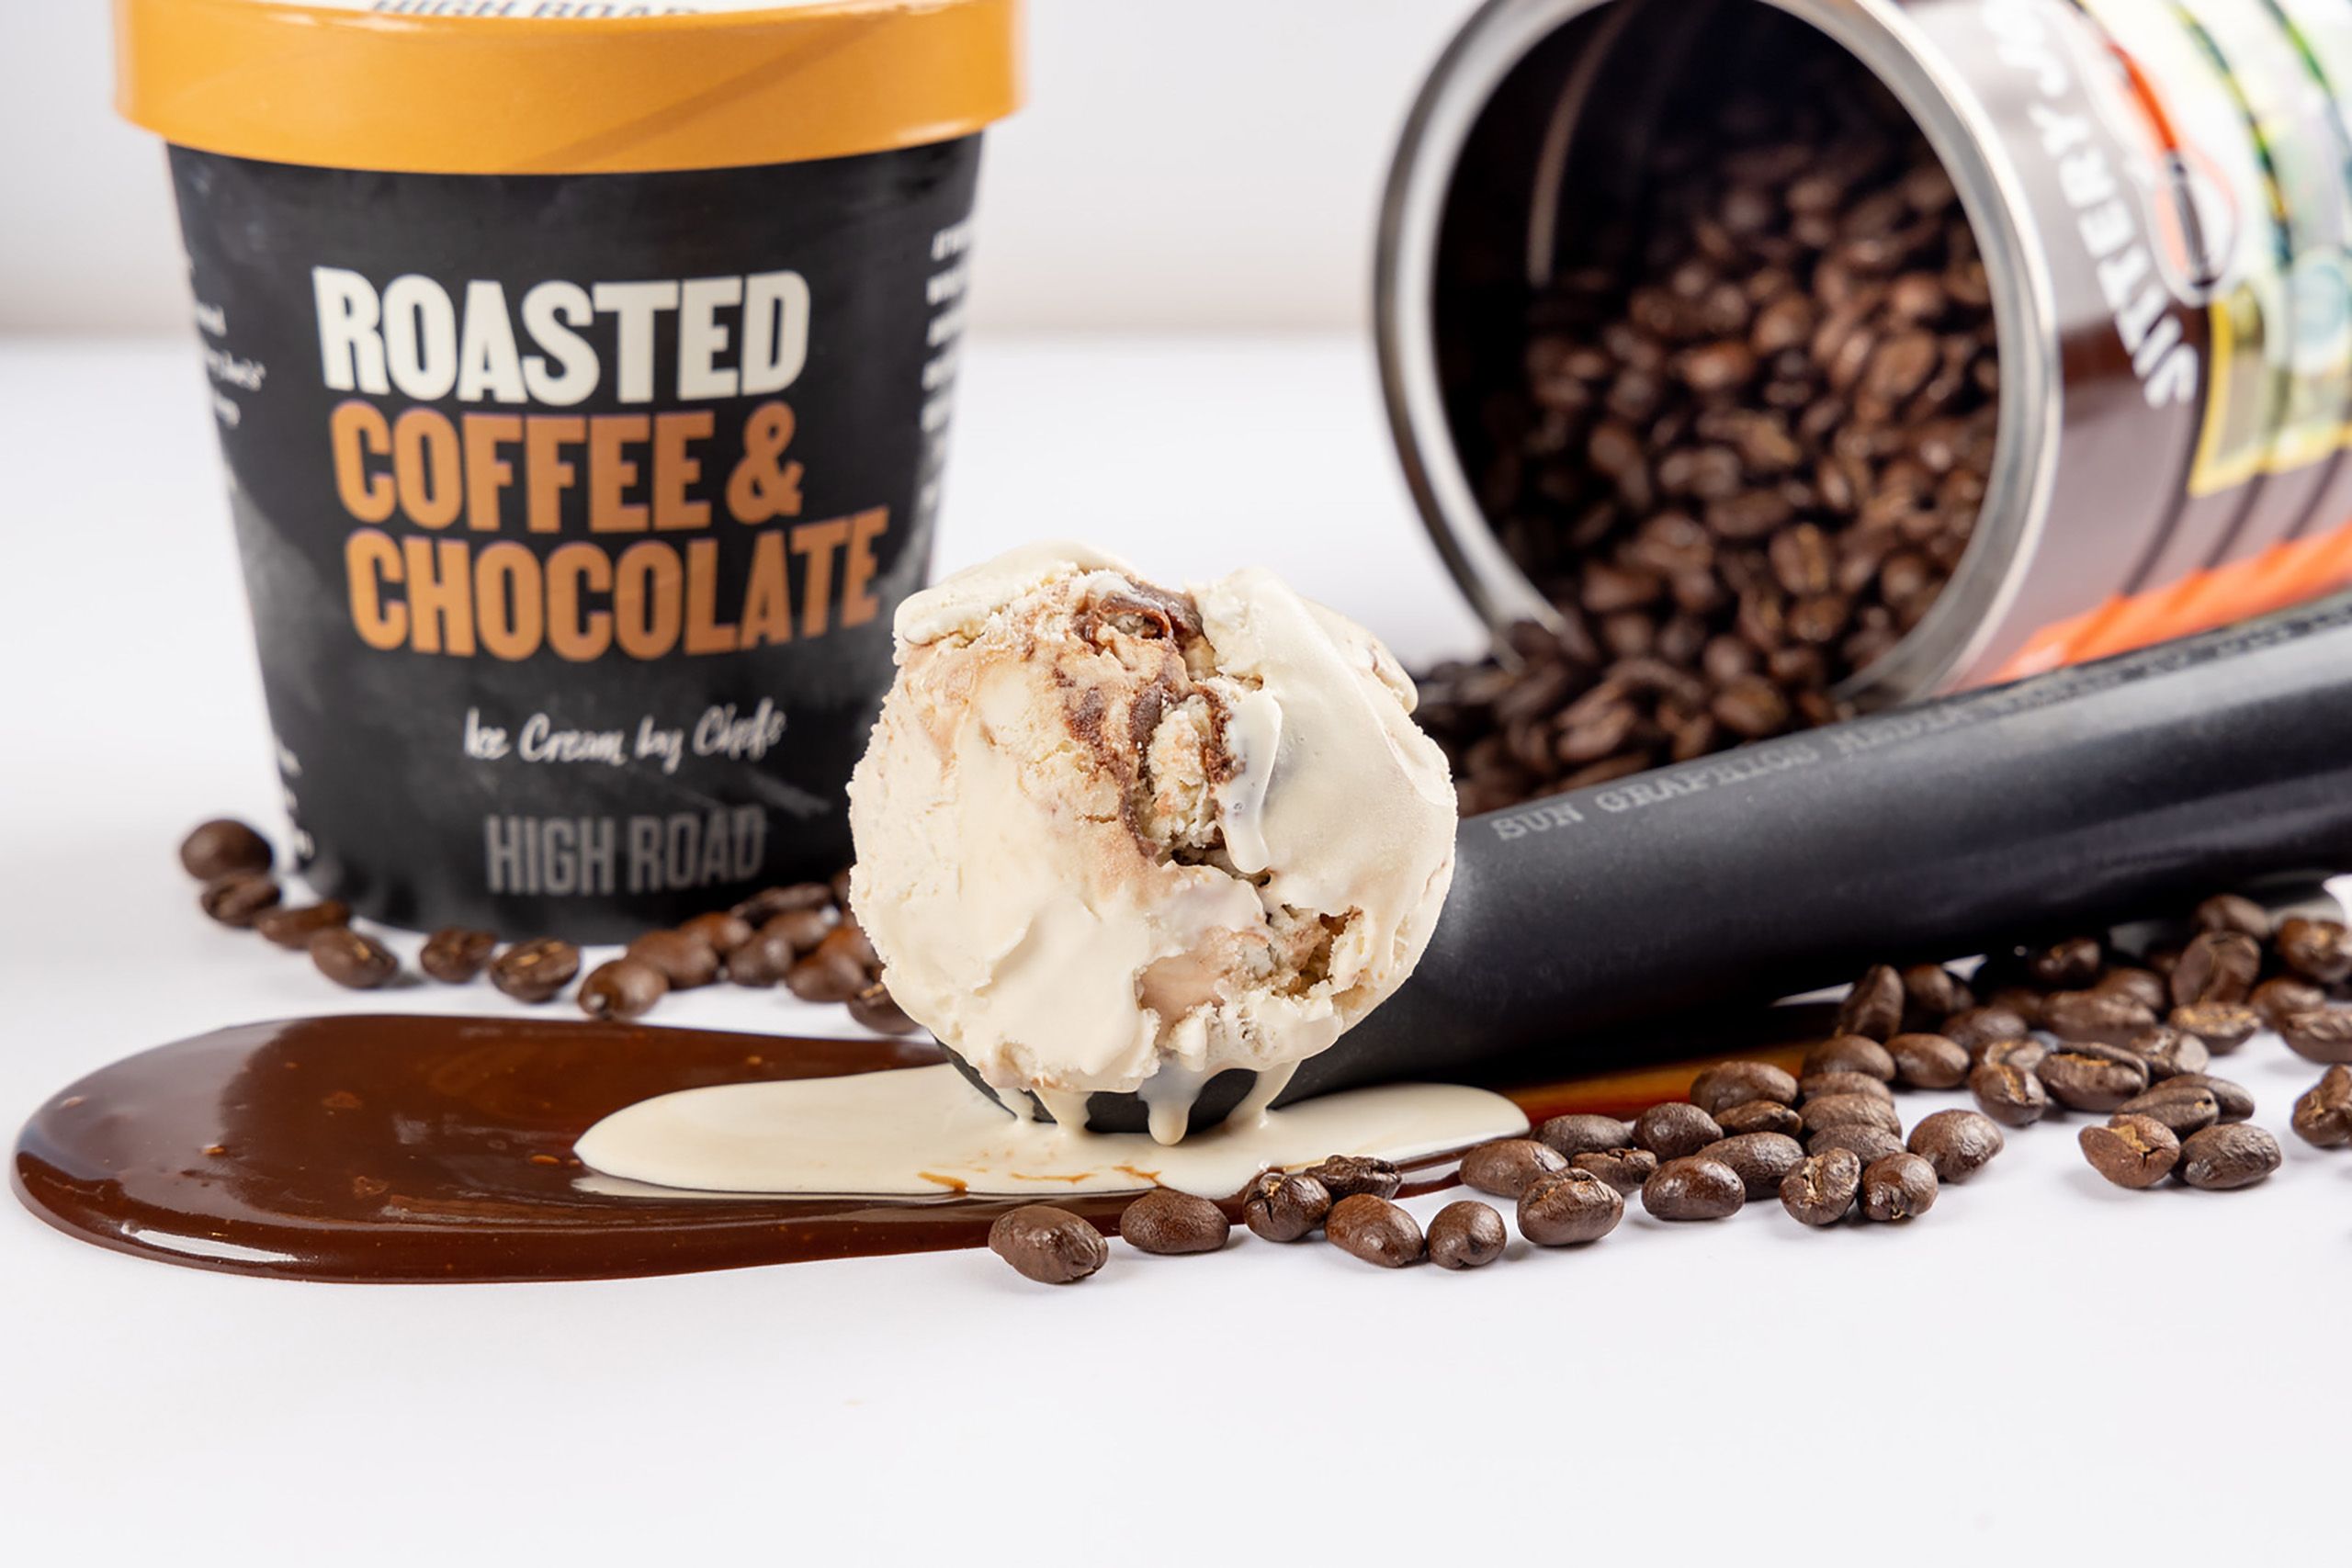 A scoop of roasted coffee and chocolate ice cream melts into a pool of chocolate syrup, surrounded by a scatter of coffee beans.